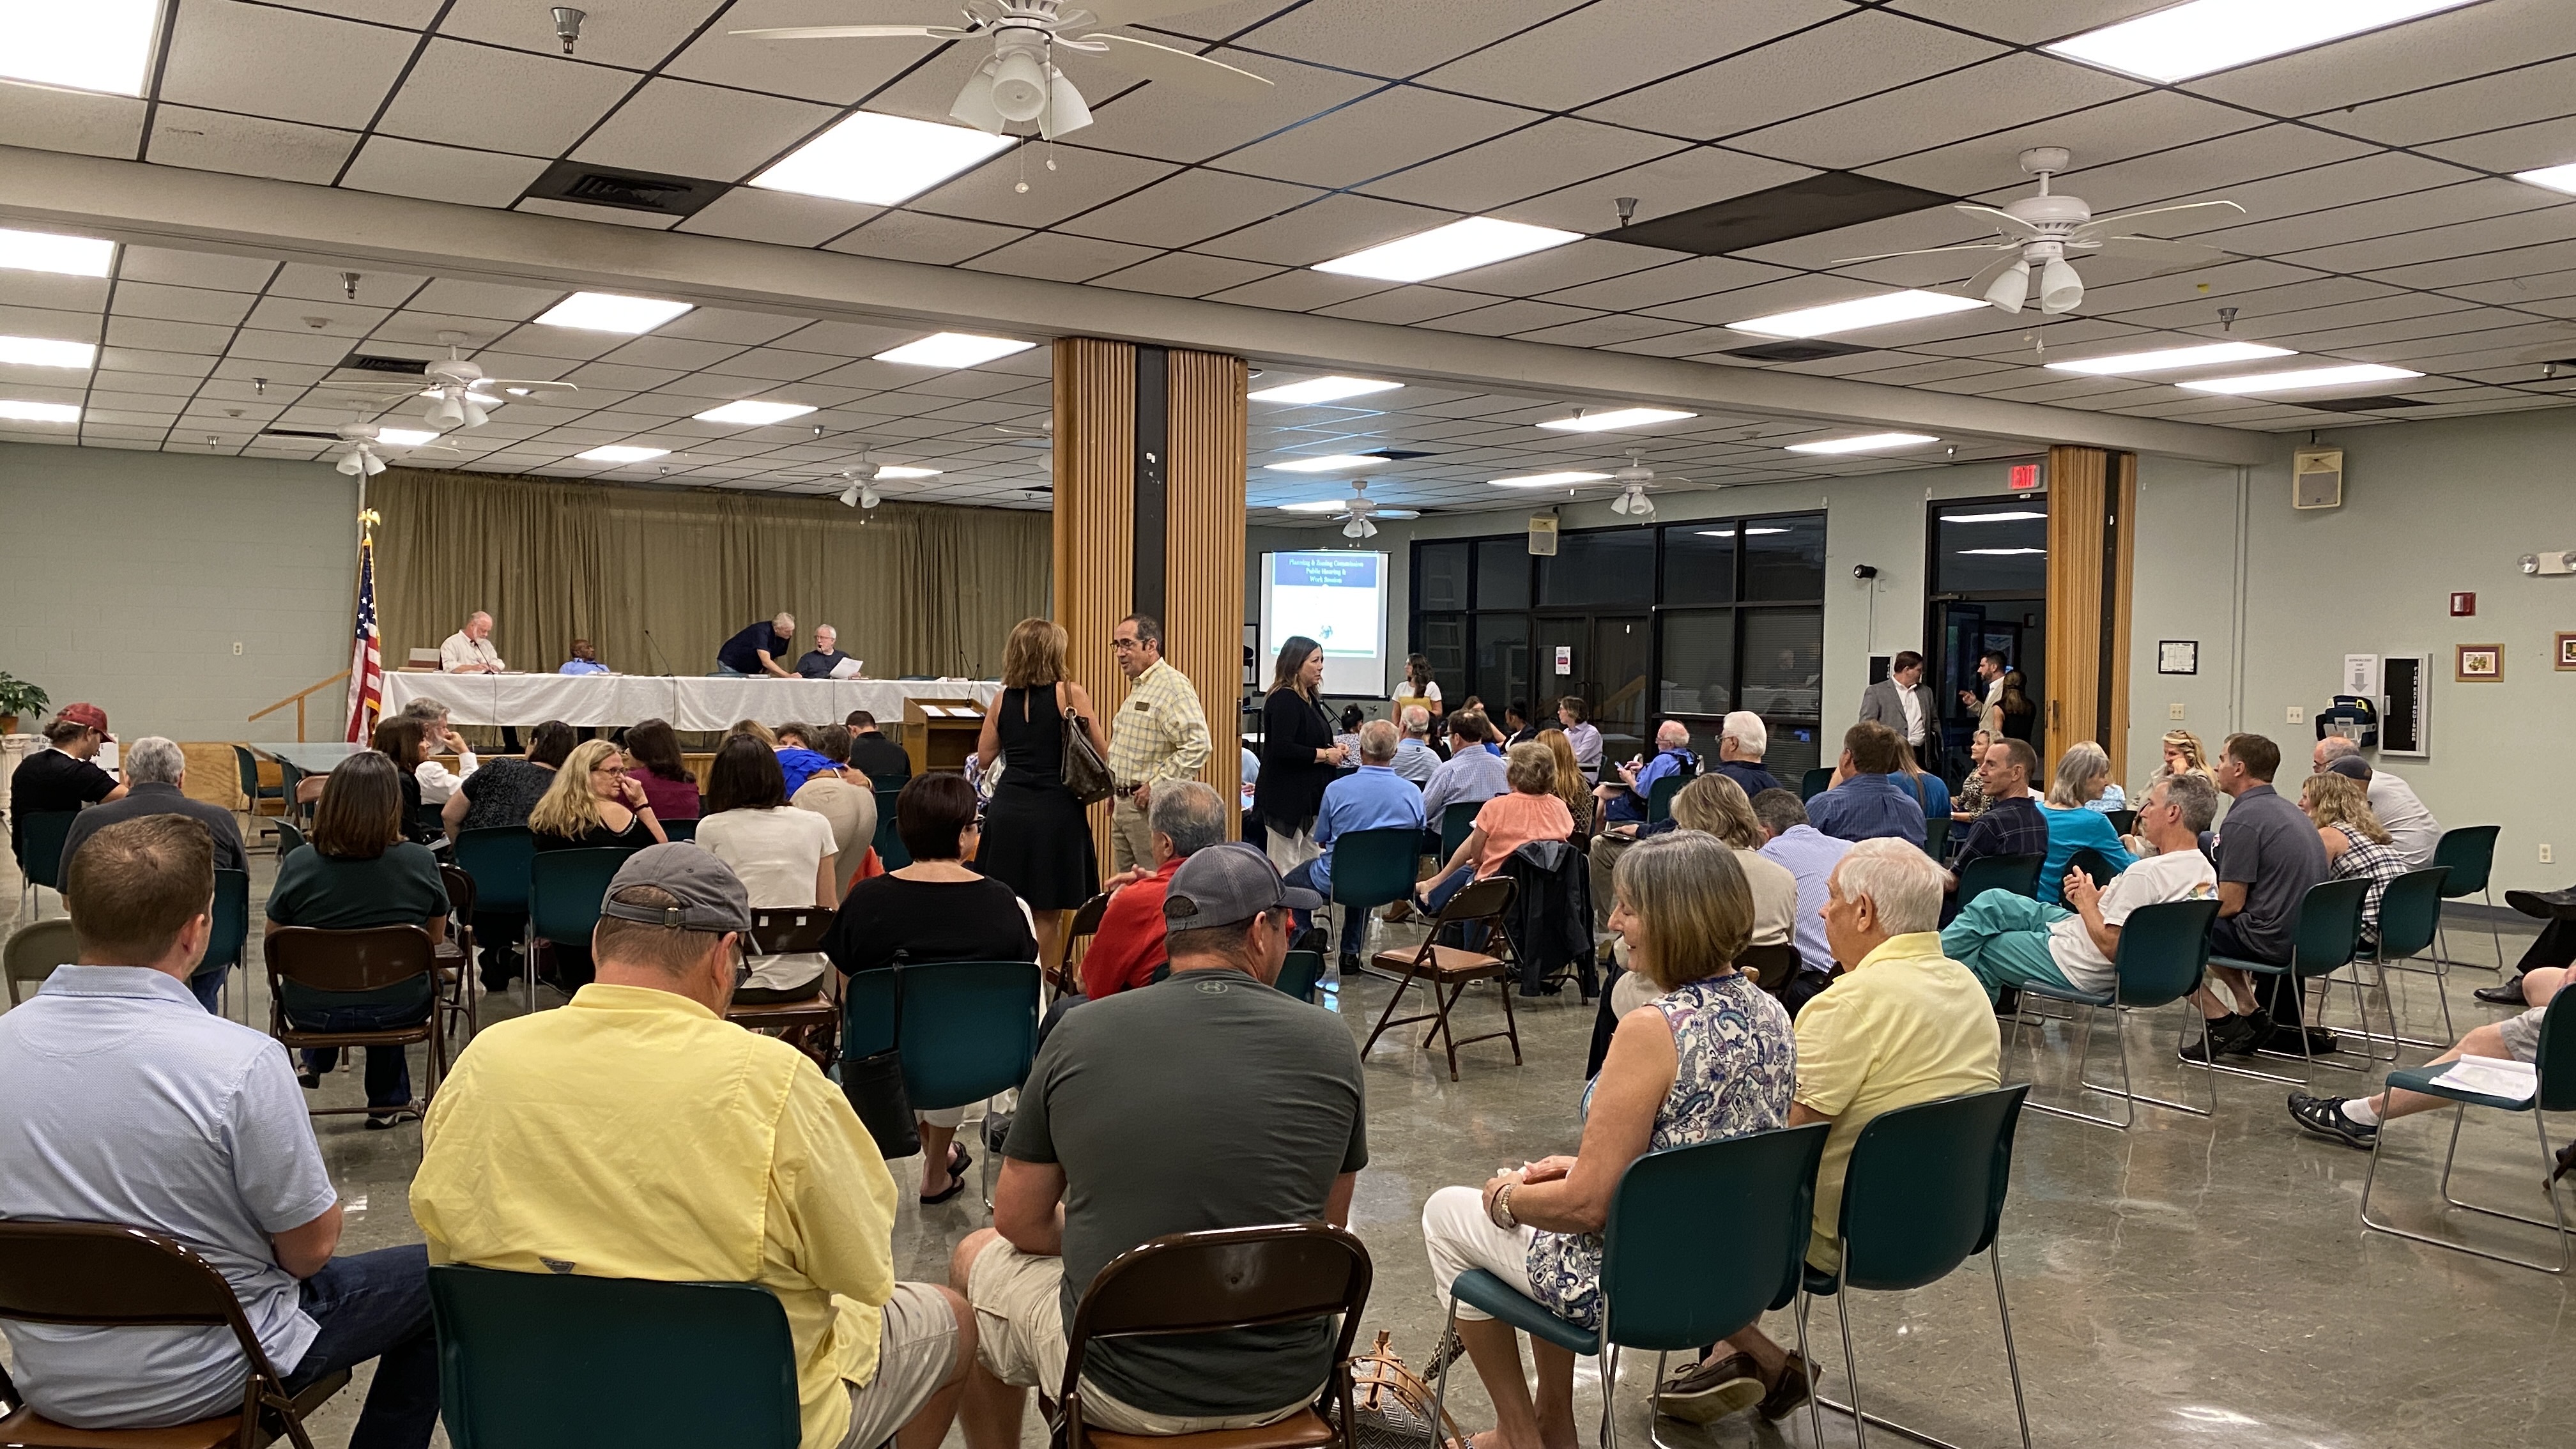 The crowd started filling up the Paul Spitzfaden Community Center before the scheduled start of the June 22, 2021, Planning & Zoning Commission meeting. (Mandeville Daily/William Kropog)